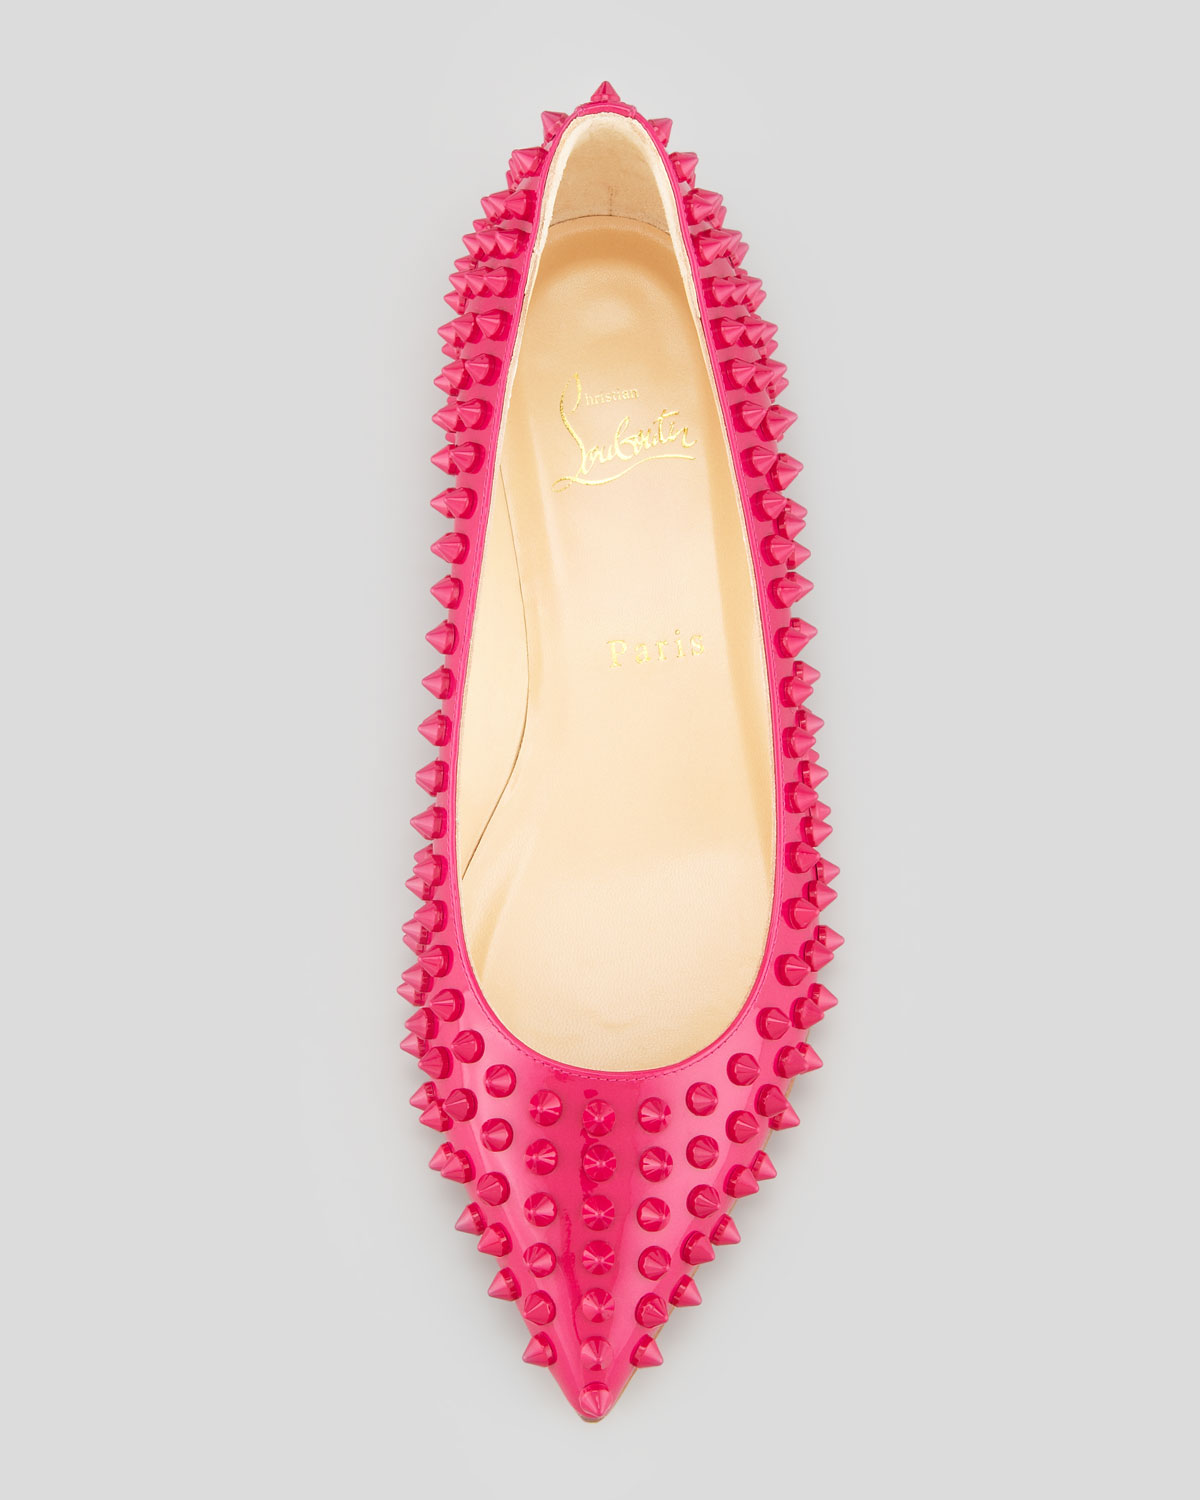 christian louboutin pigalle pink spikes - Obsidian Wellness Centre  